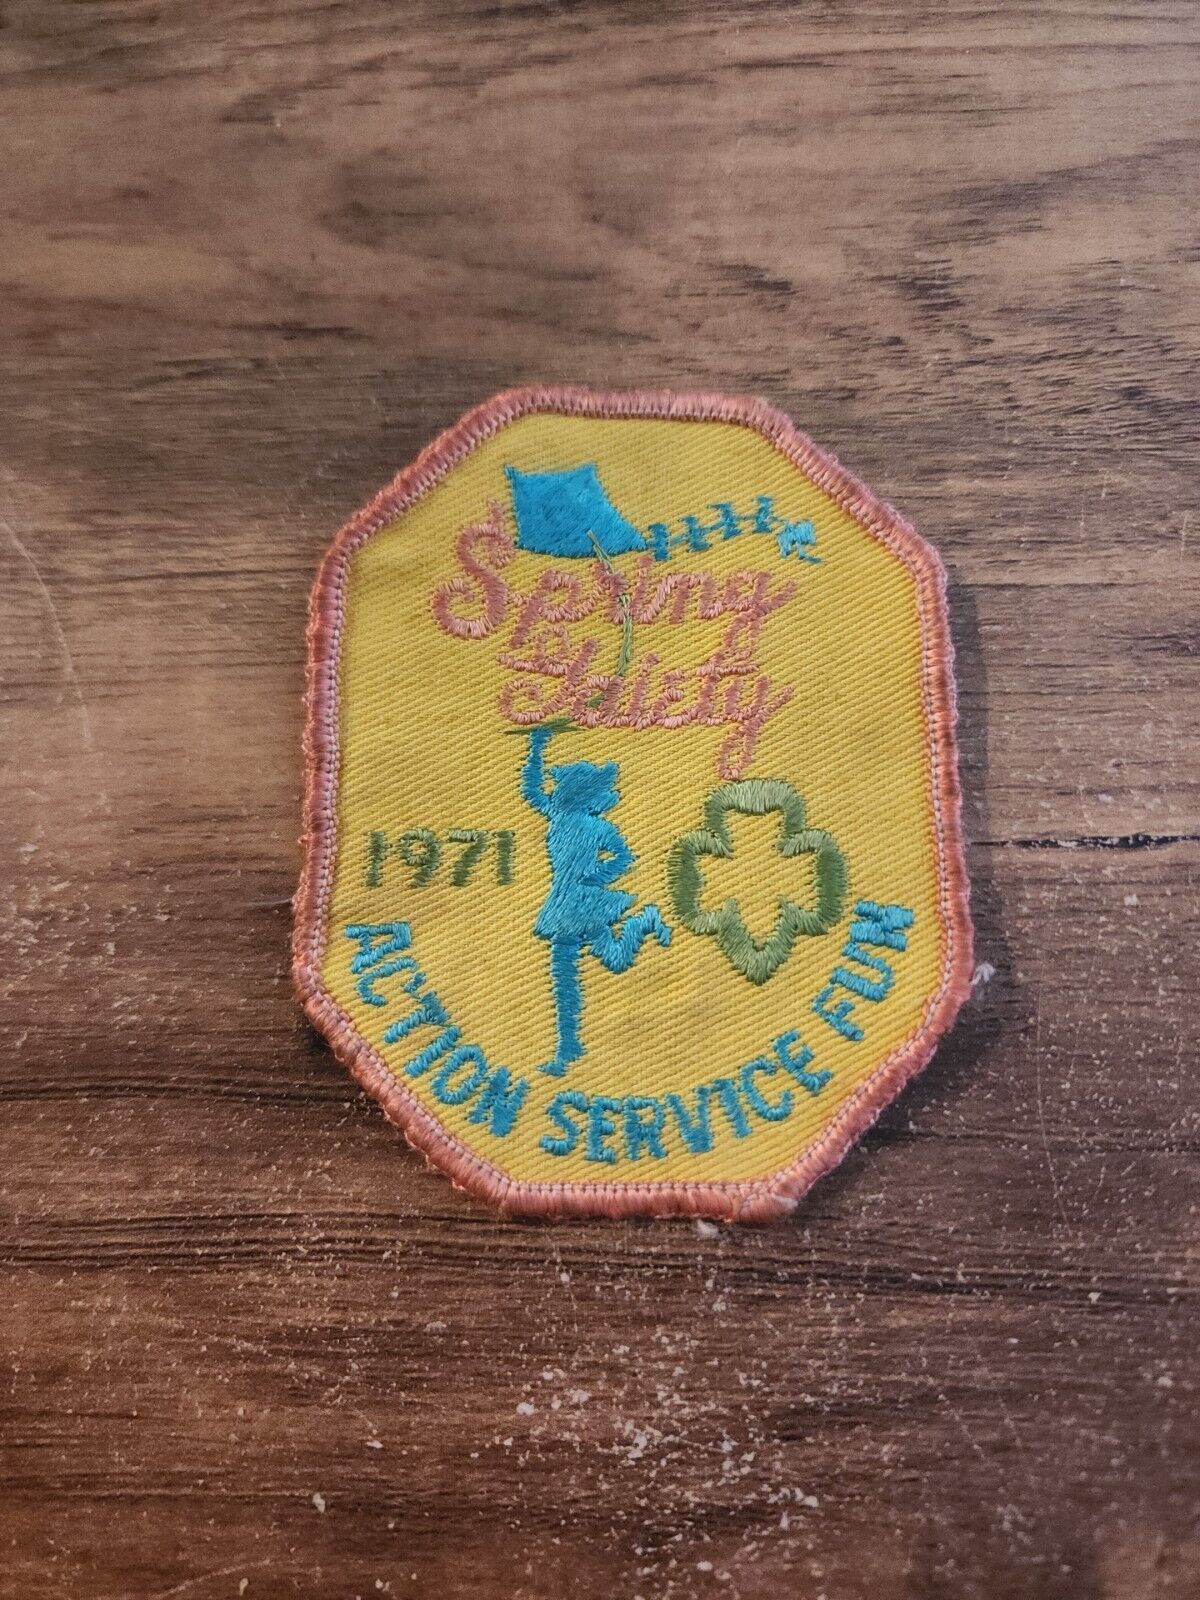 Girl Scouts Vintage - Spring Yaiety Action Service Fun 1971 - Patch 